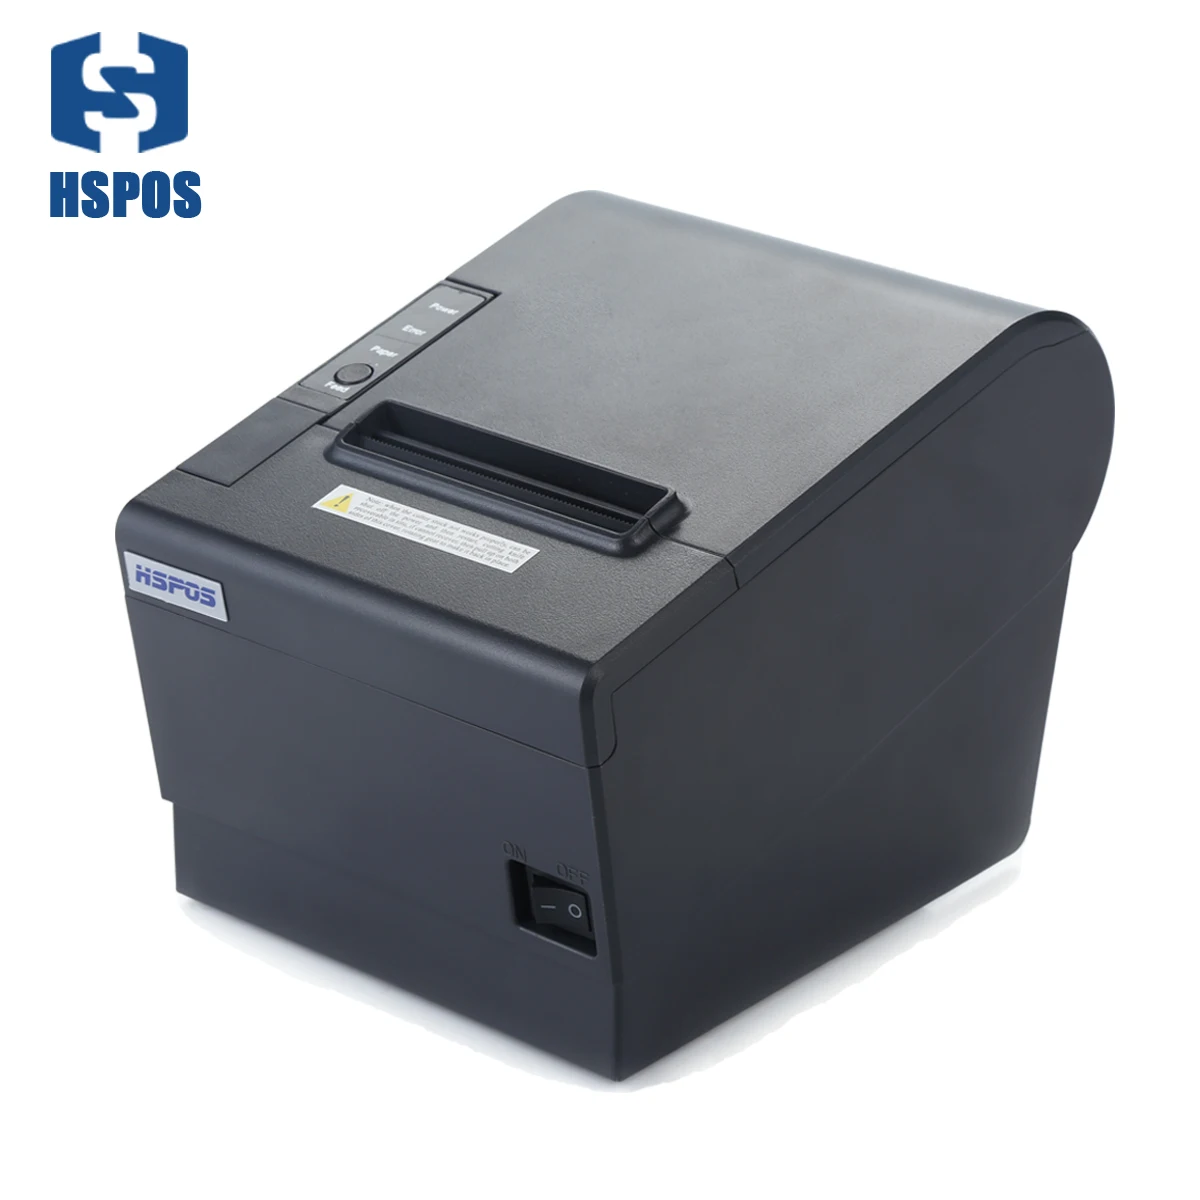 

Factory price 80Mm Thermal Receipt Printer USB Lan Interface with Auto Cutter POS system, Black color